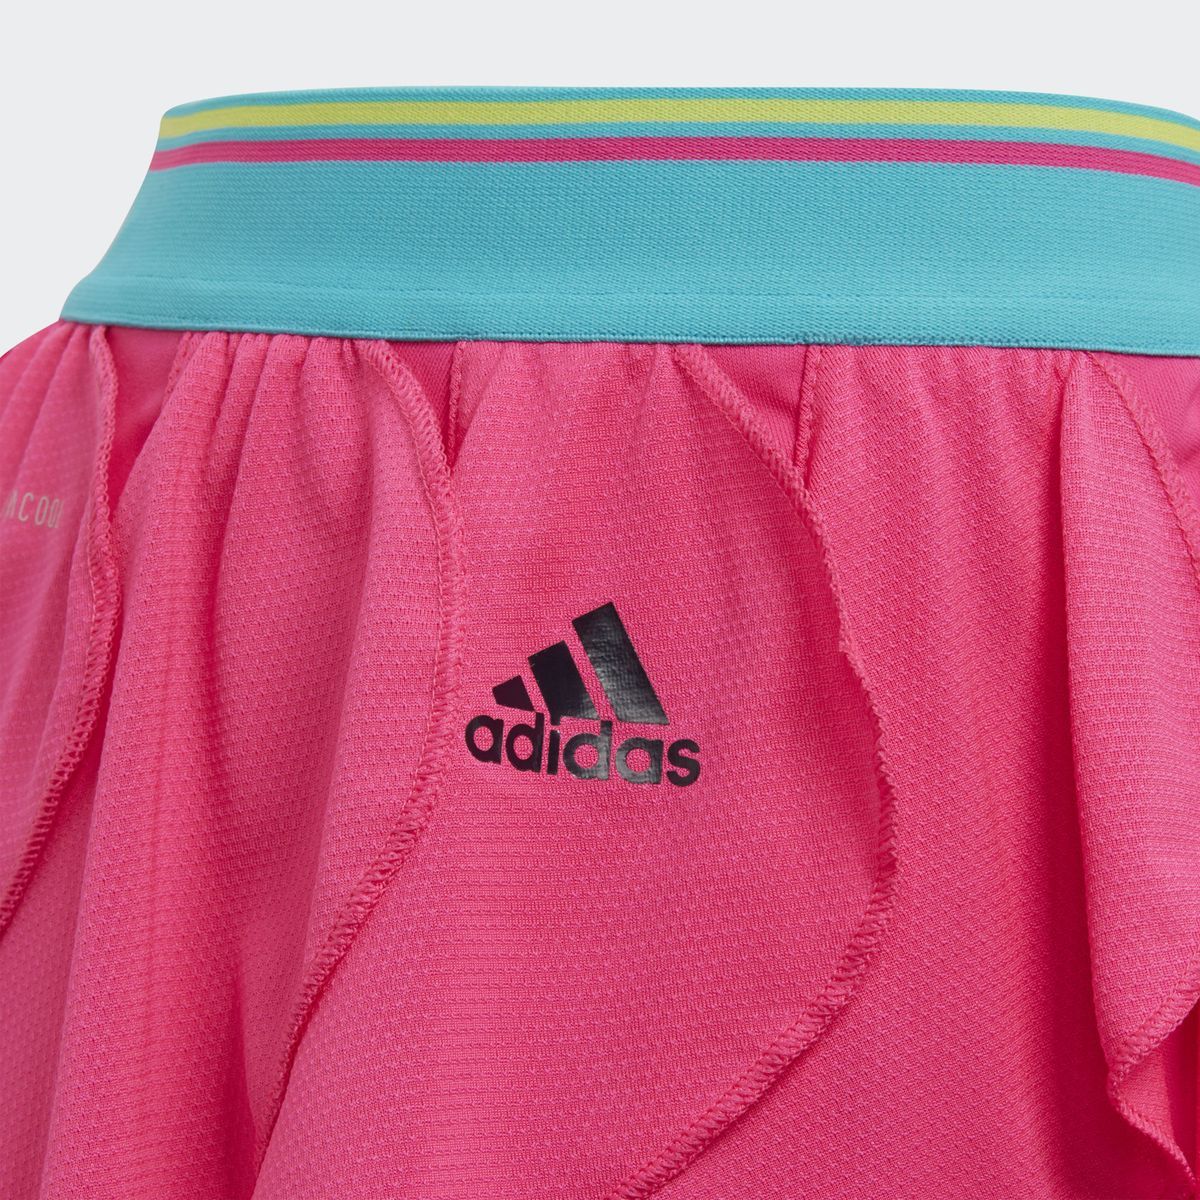    Adidas G Frilly Skirt, : . DH2806.  164